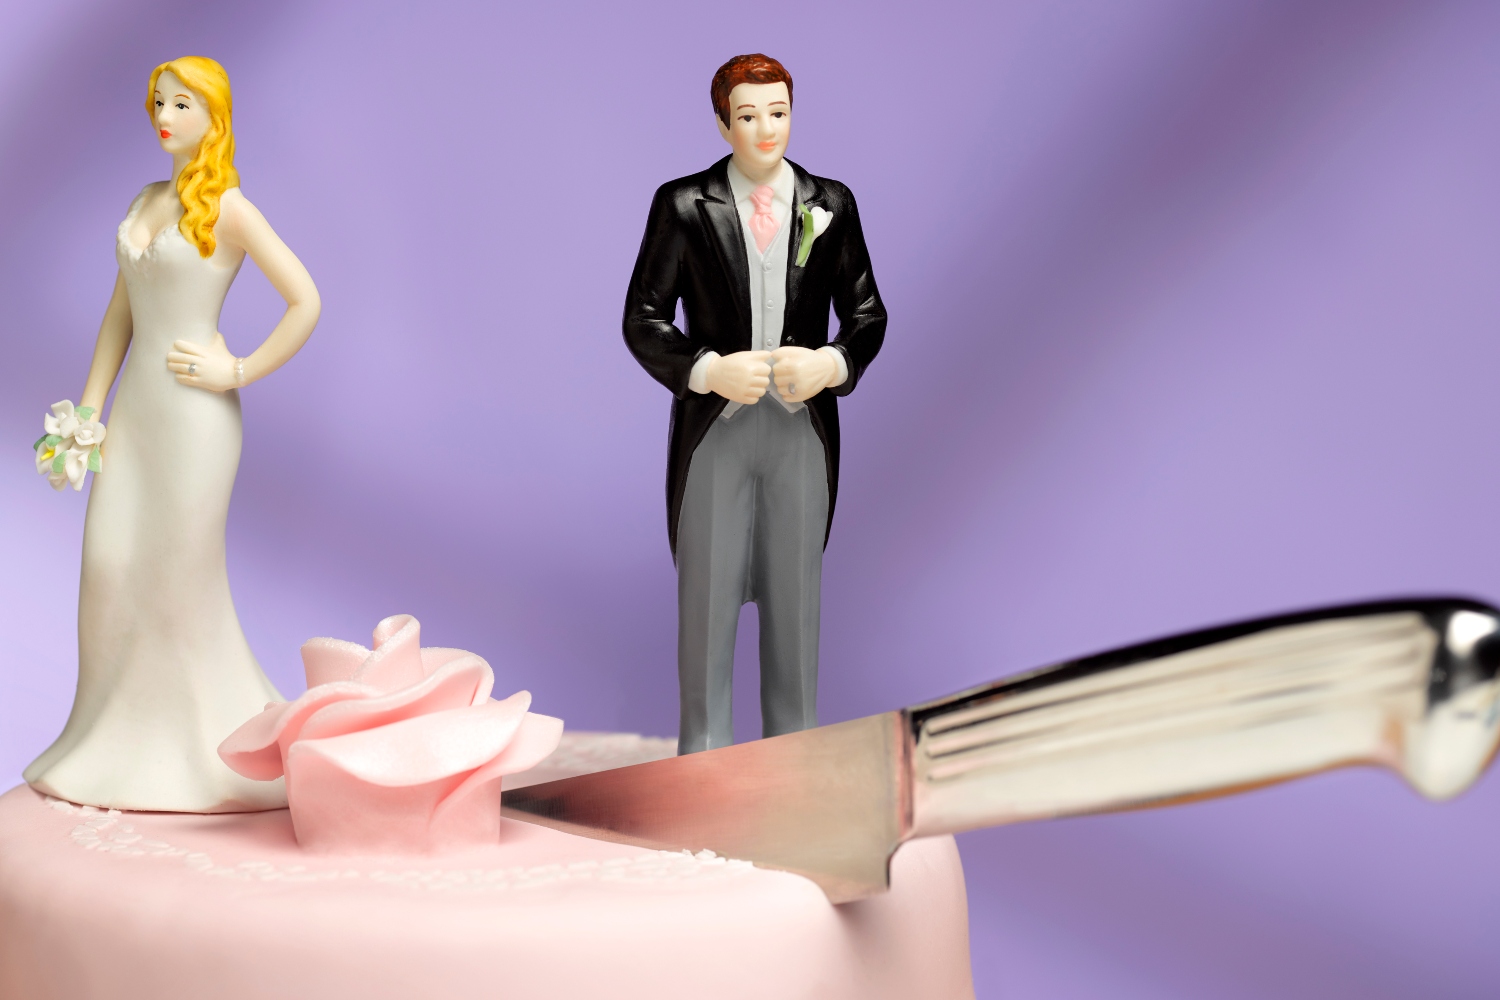 Bride and groom wedding cake toppers separated by knife; divorce concept